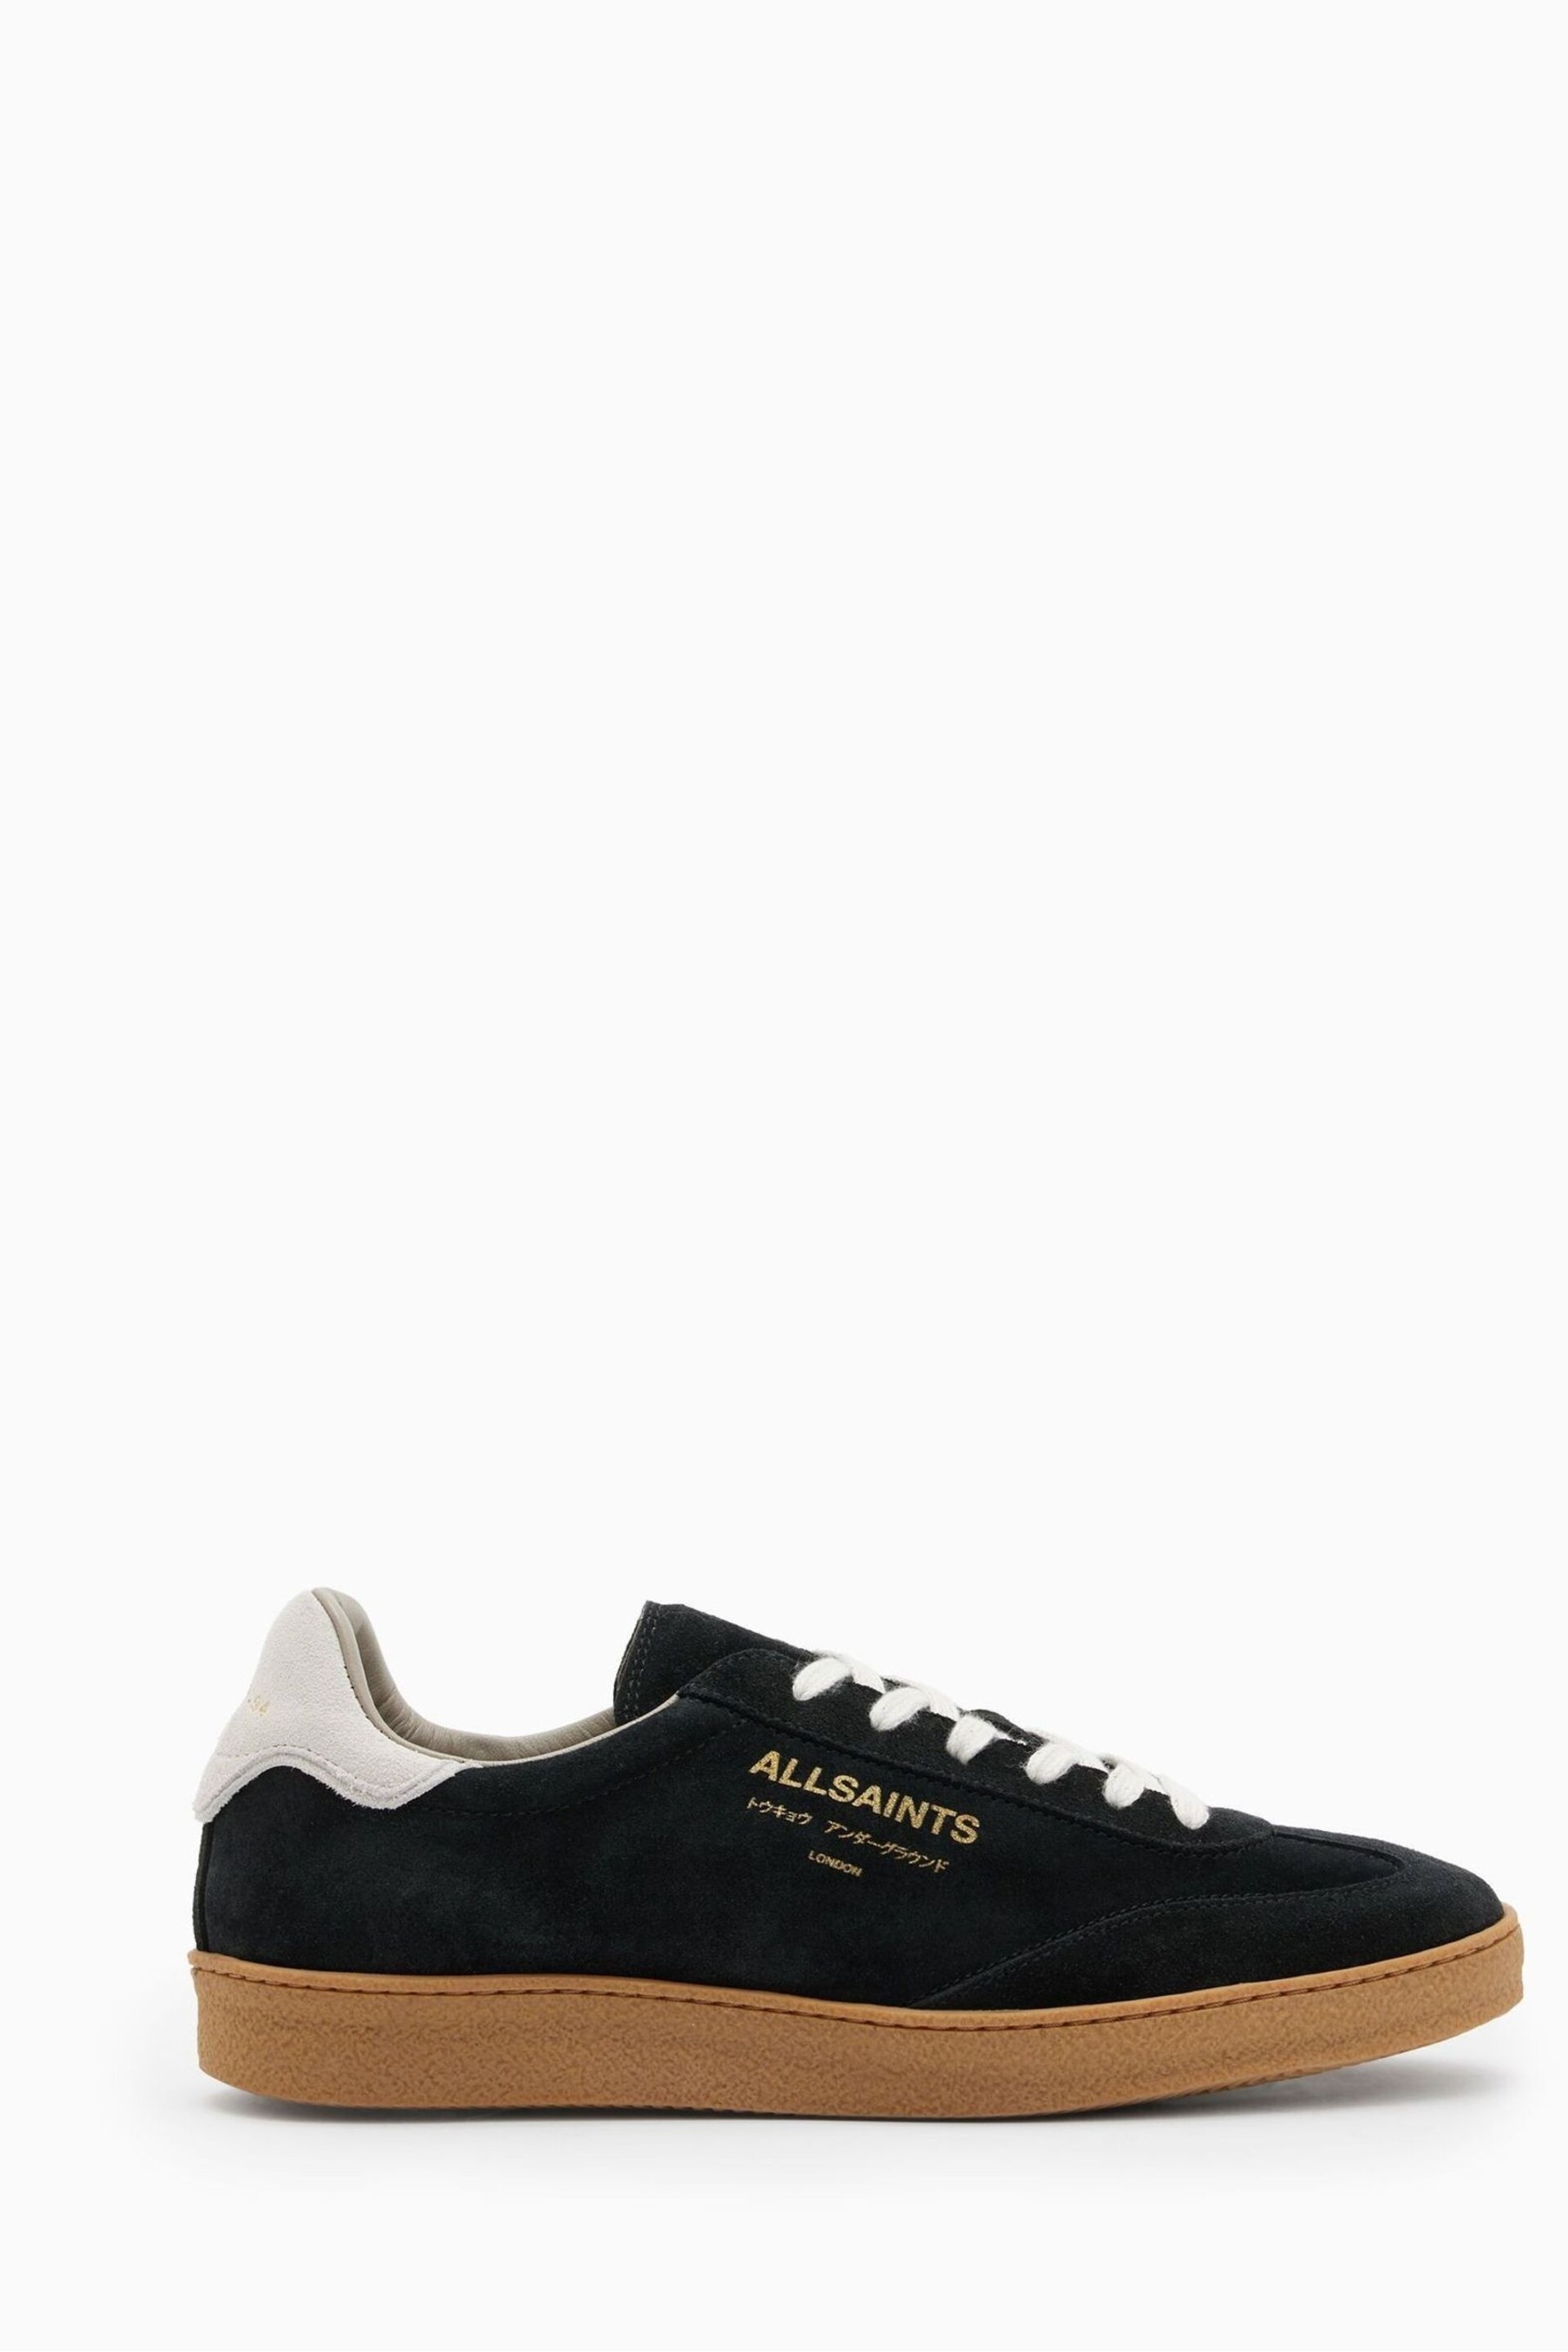 AllSaints Black Suede Thelma Sneakers - Image 1 of 5